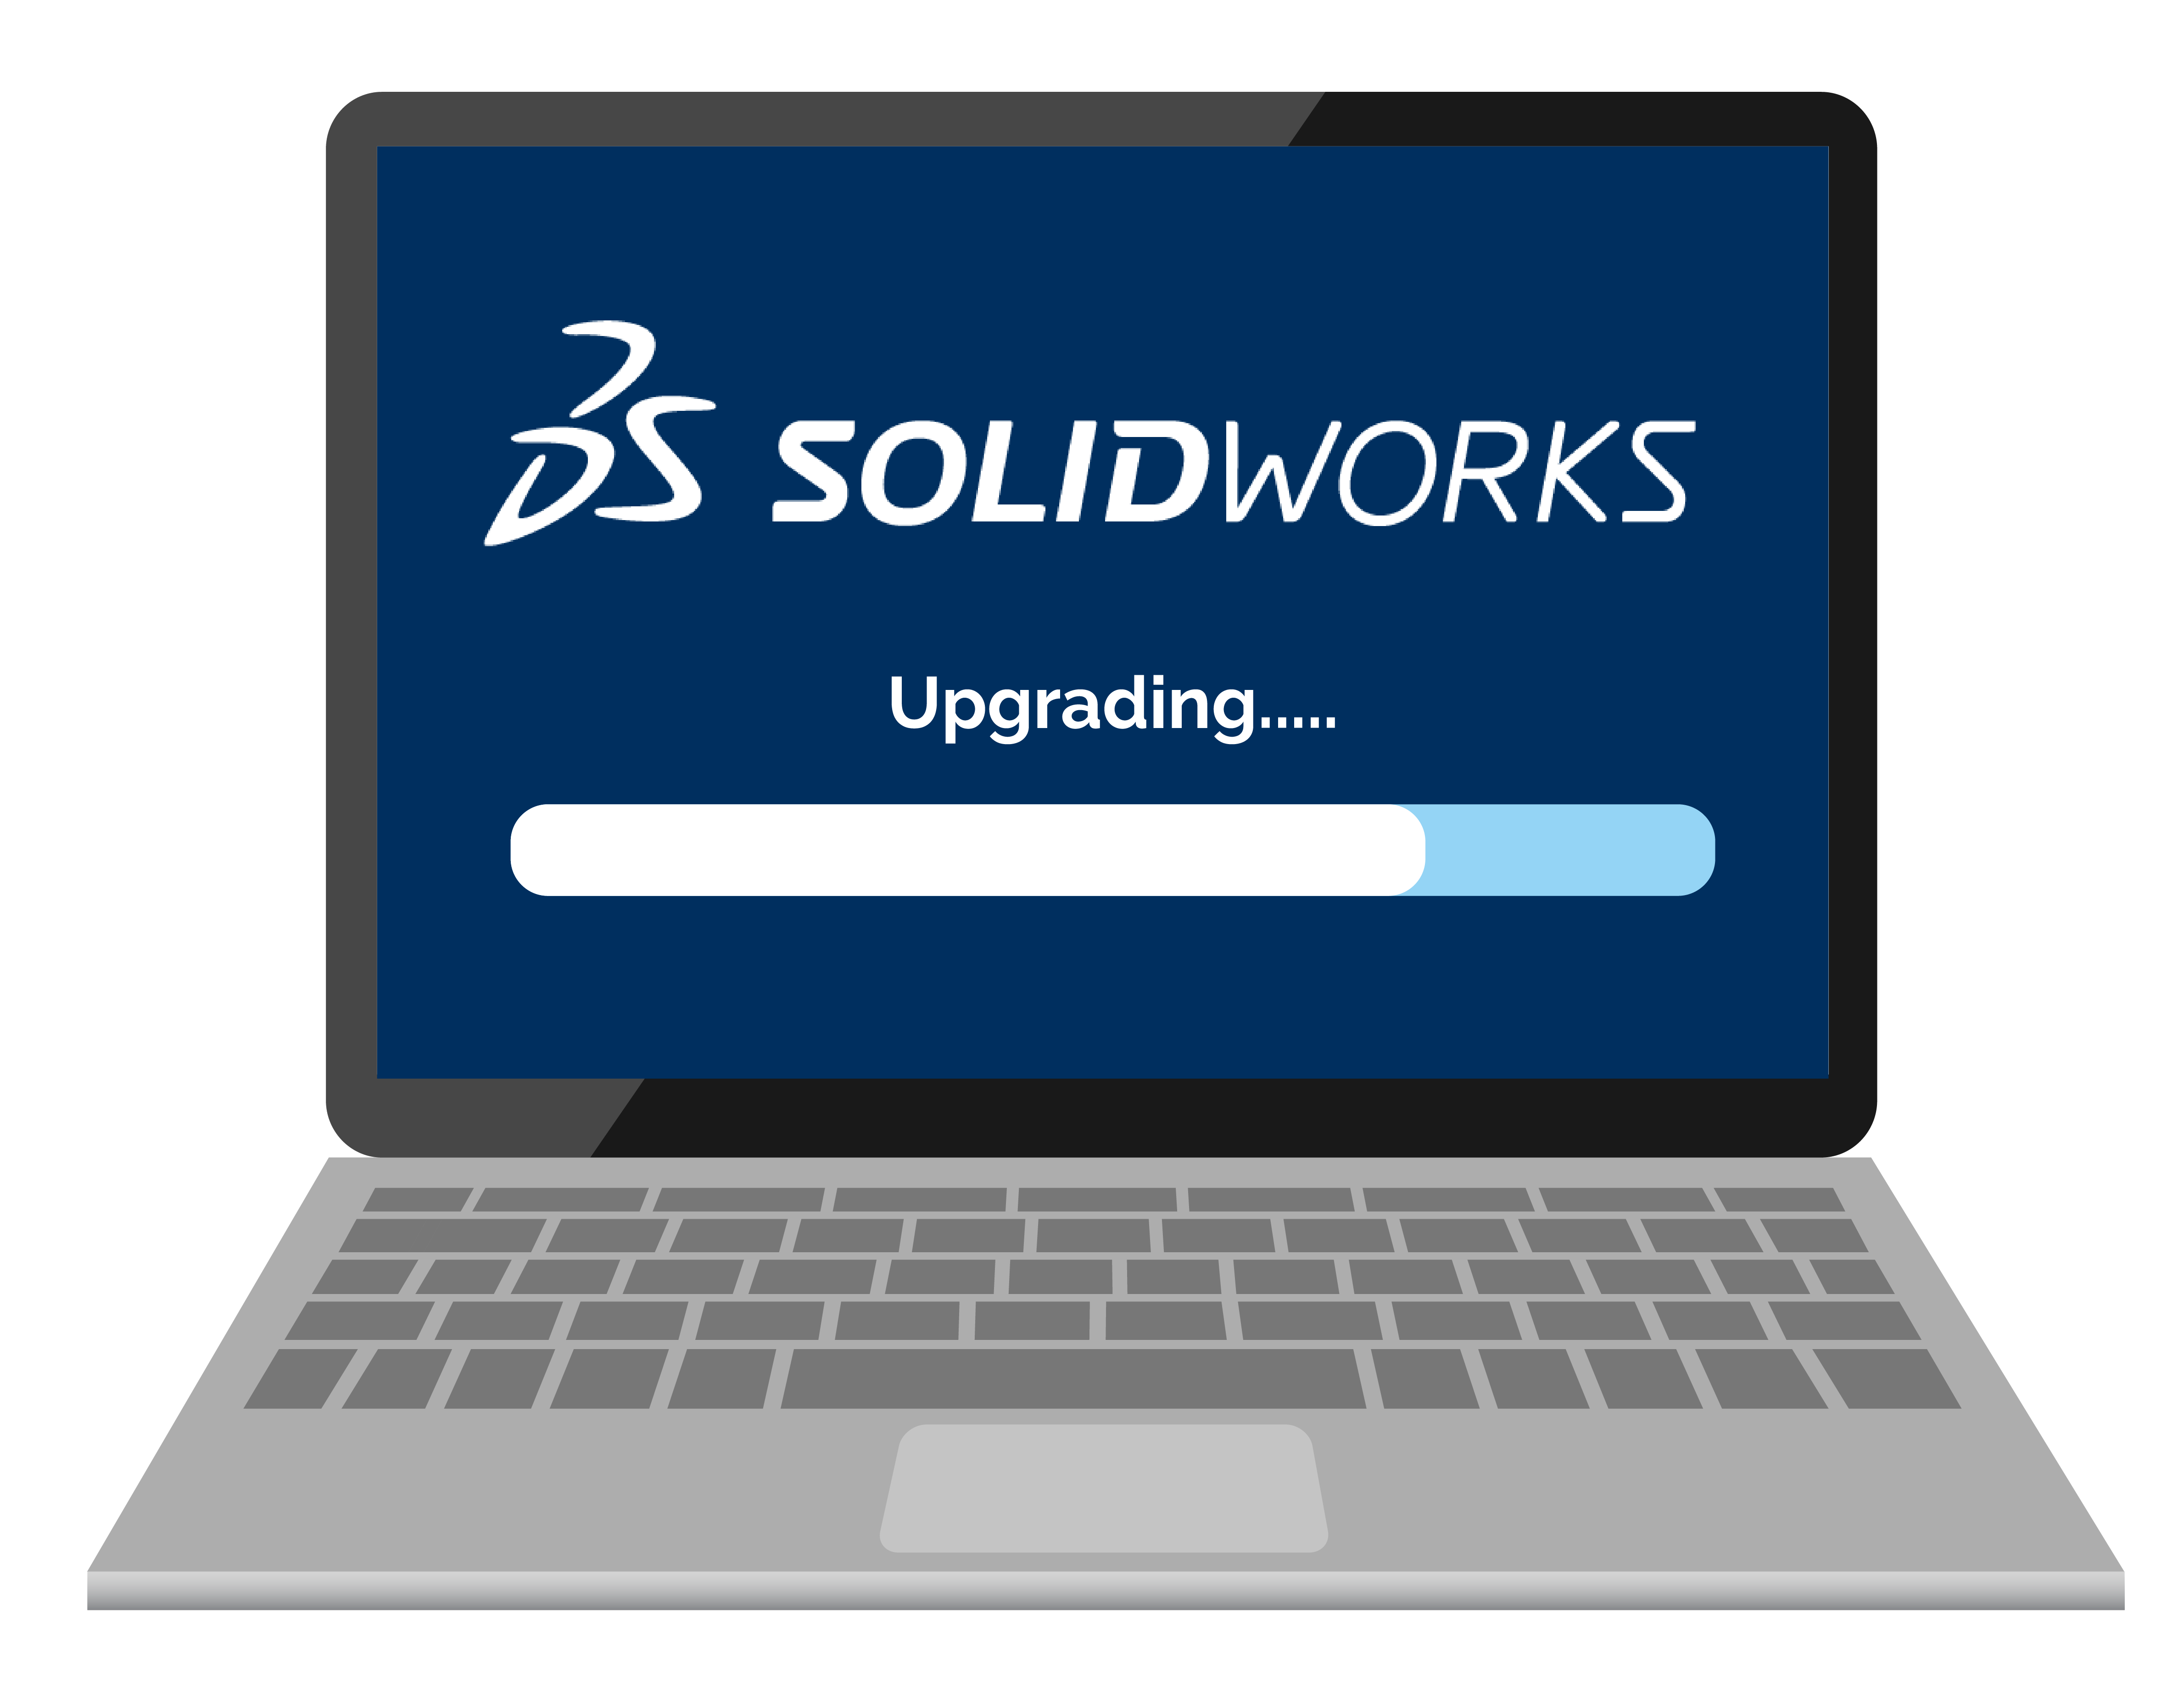 solidworks-upgrading-computer-01